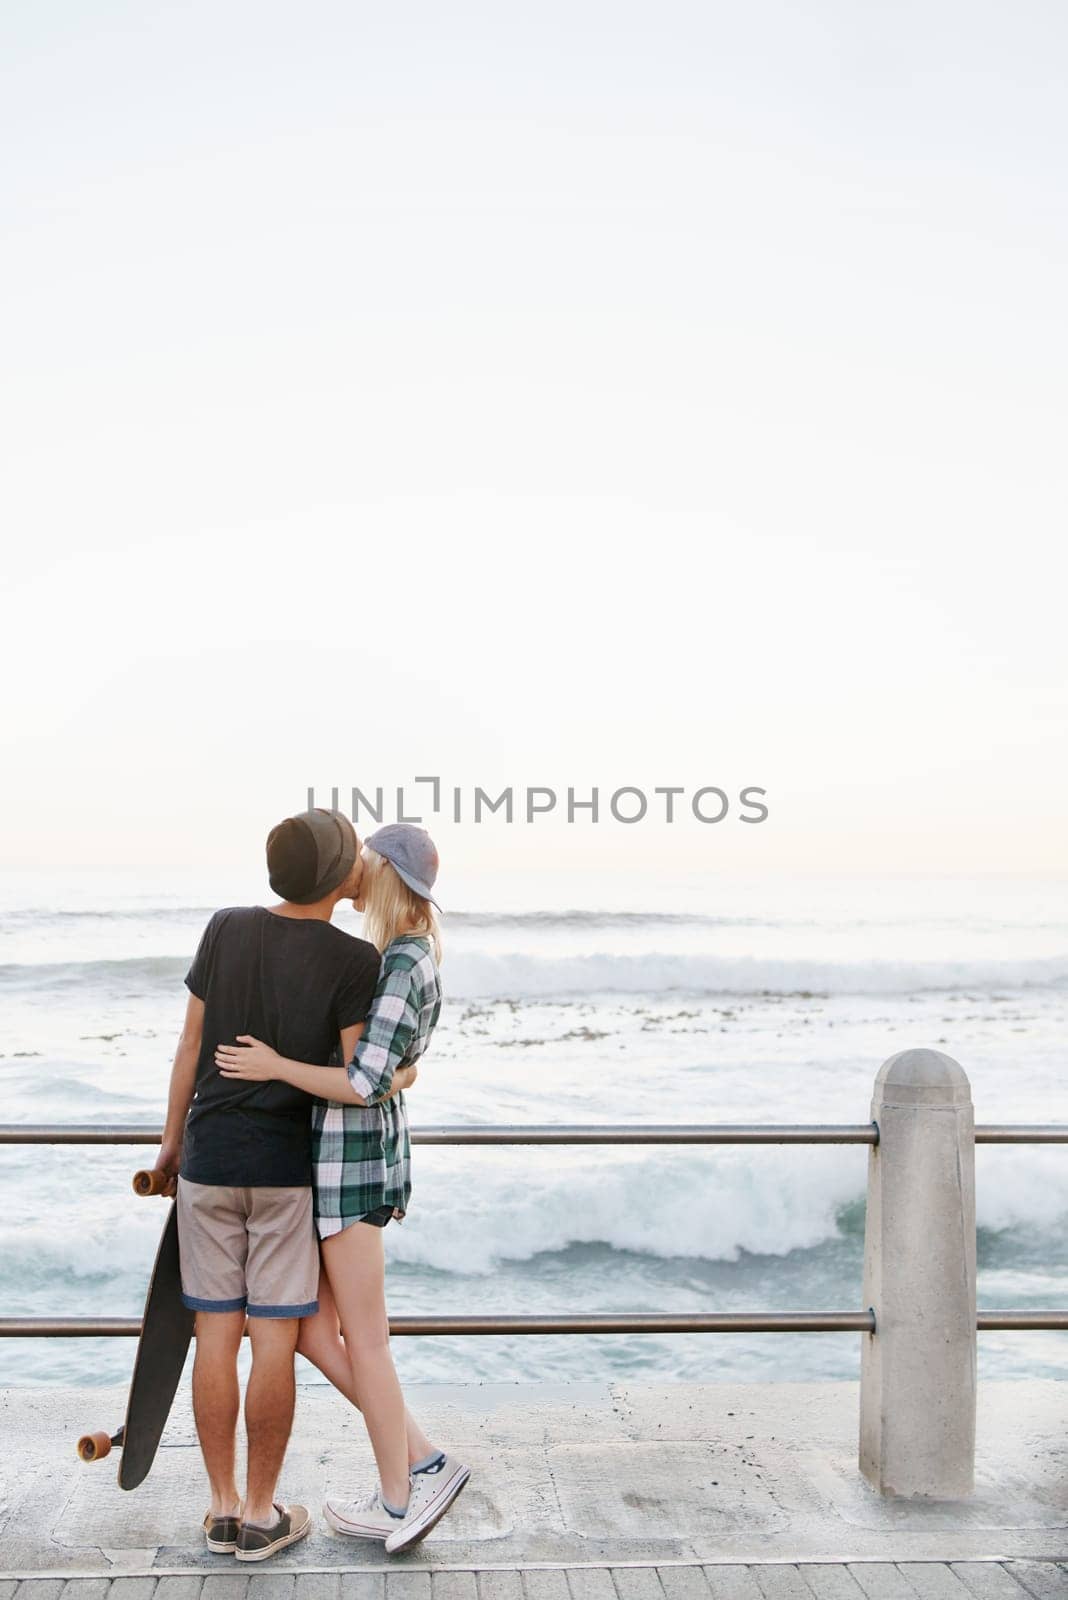 Couple, kiss and romance on beach for date with mockup space, adventure and skateboard on promenade. Skater, people and hugging on boardwalk for bonding, embrace and outdoor travel with sea waves.